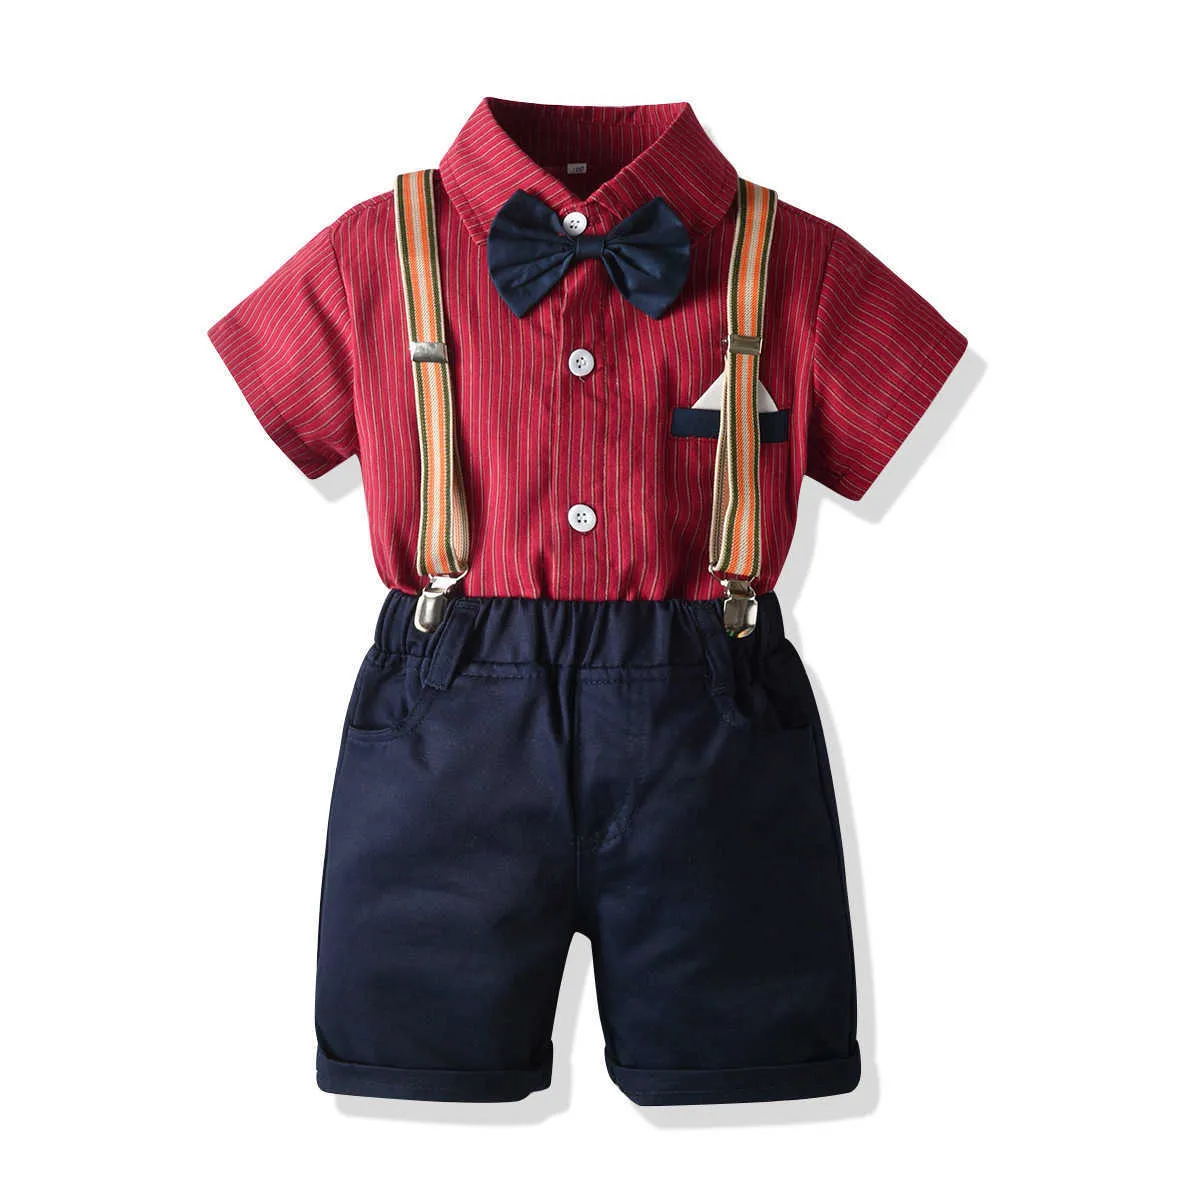 aby boy clothes and accessories | Boys summer outfits, Little boy outfits, Boys  clothes style